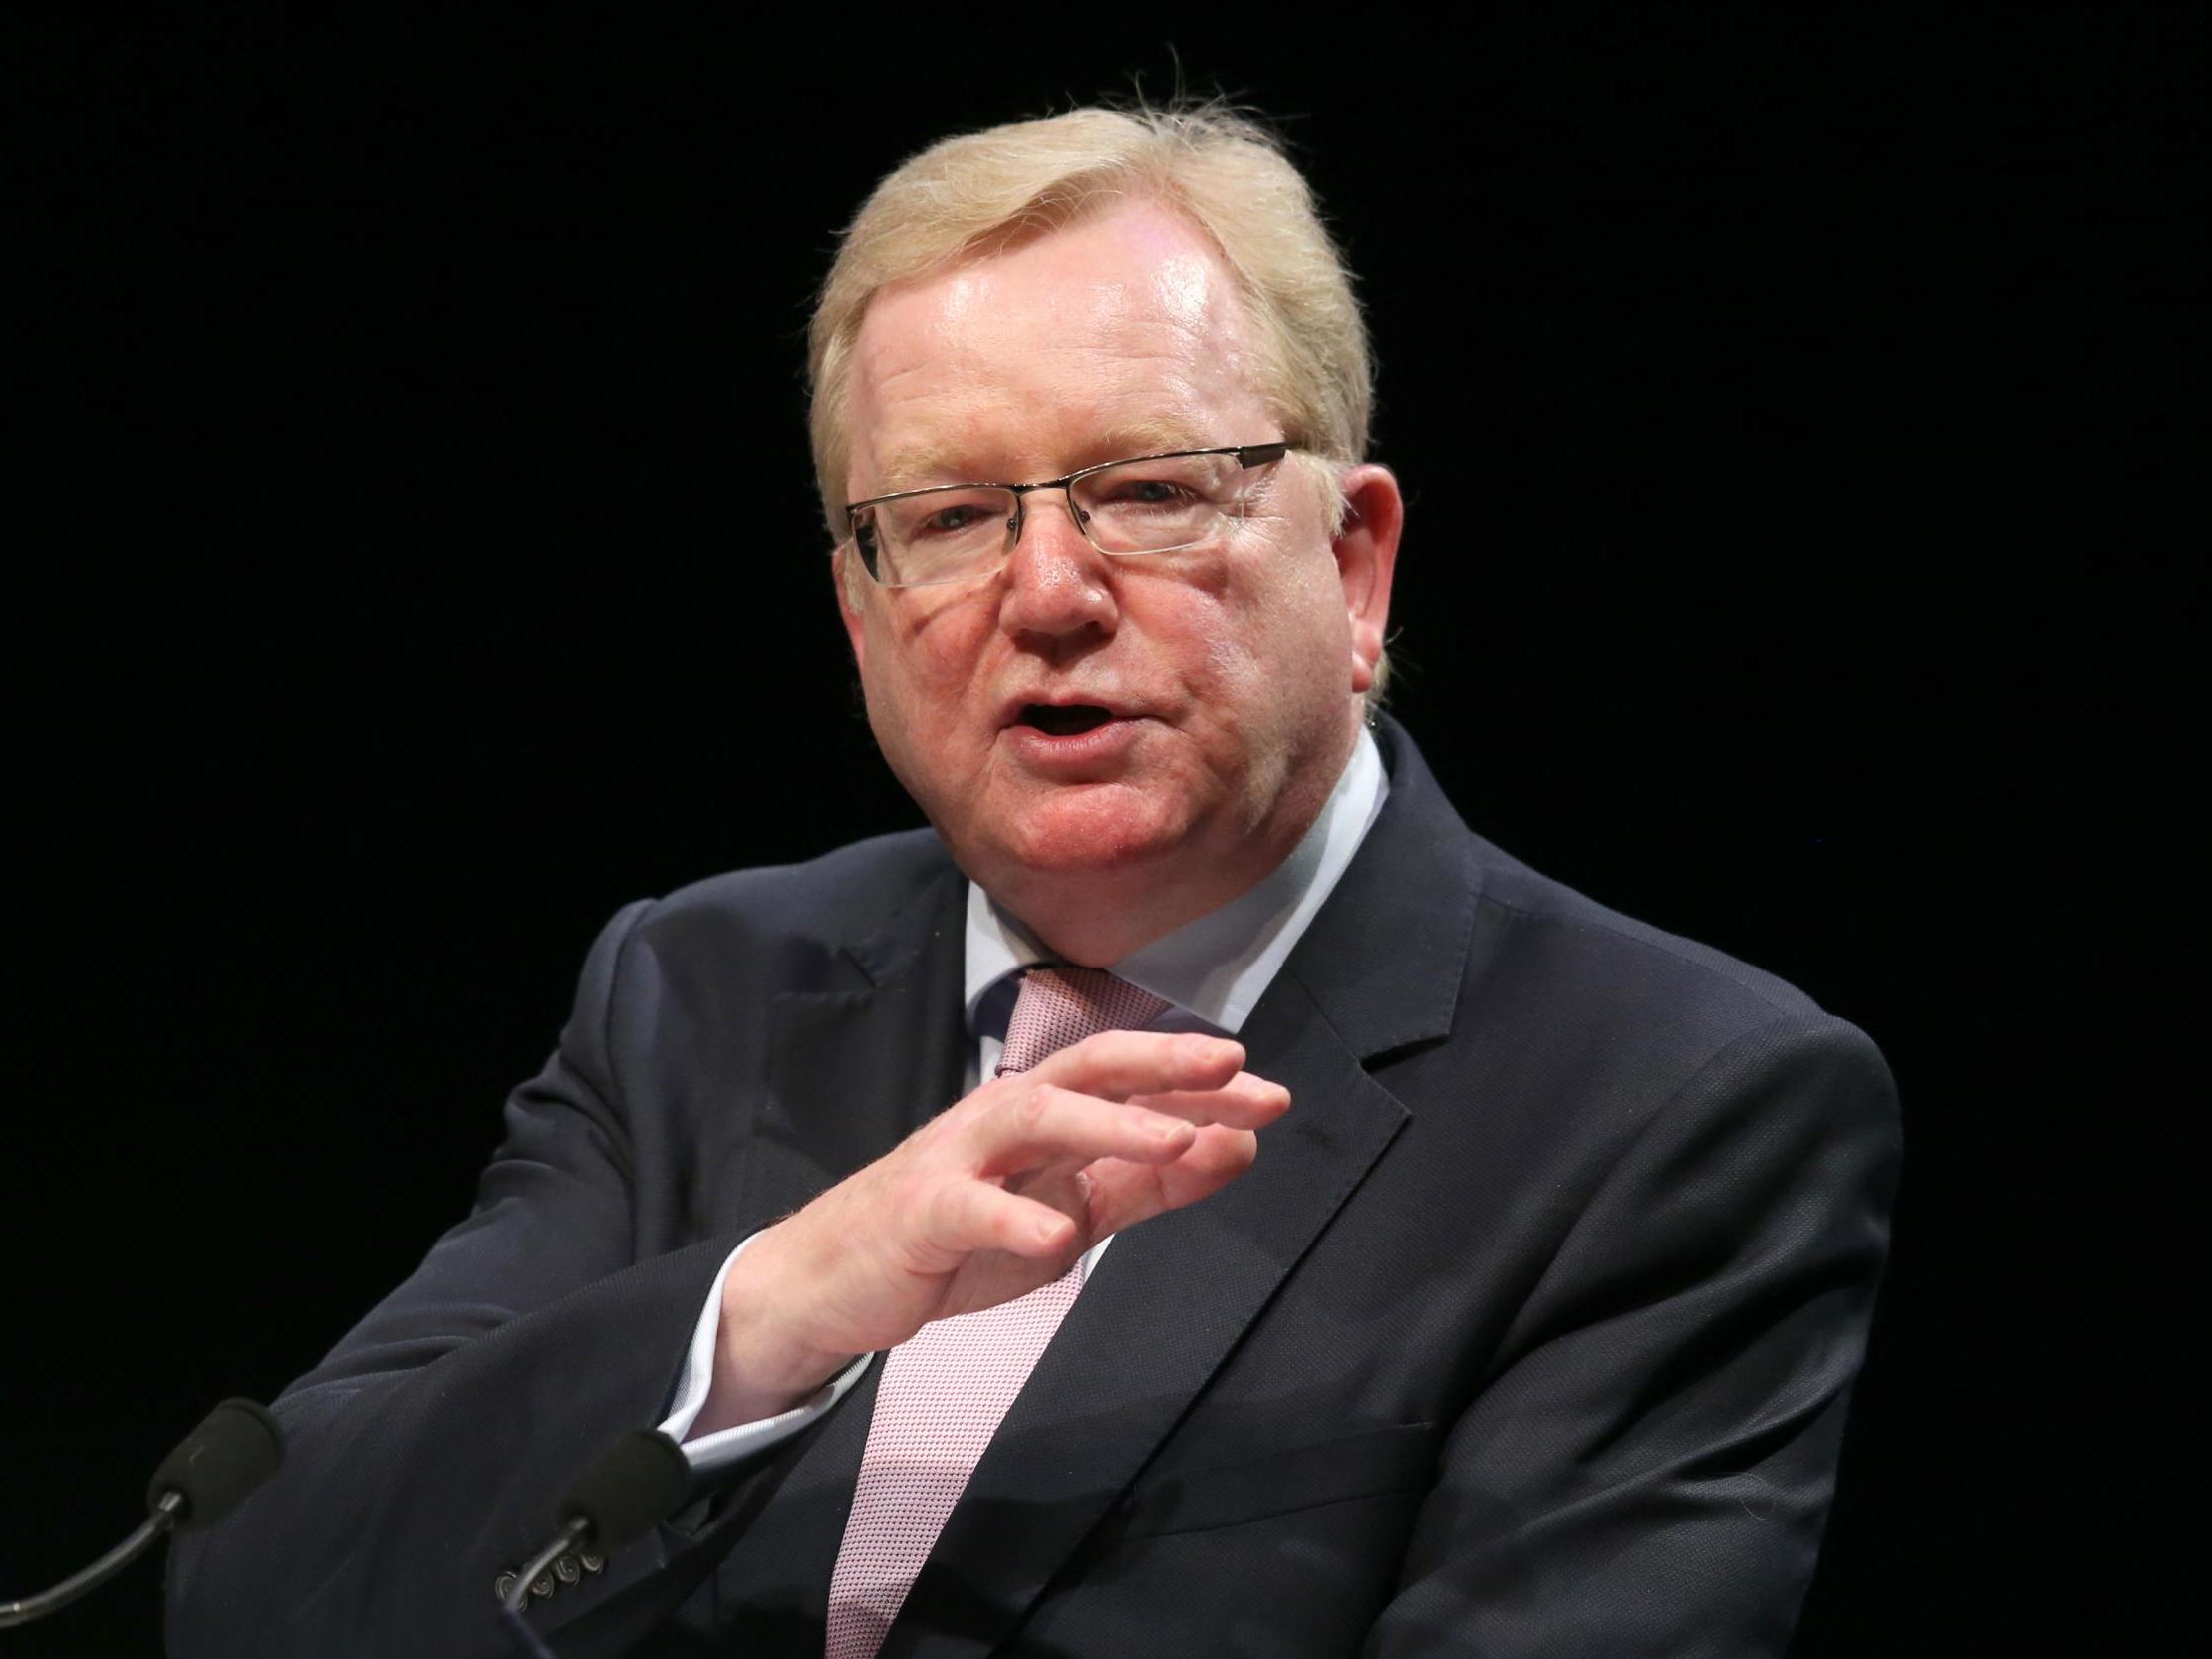 Jackson Carlaw became leader of the Scottish Conservatives in February